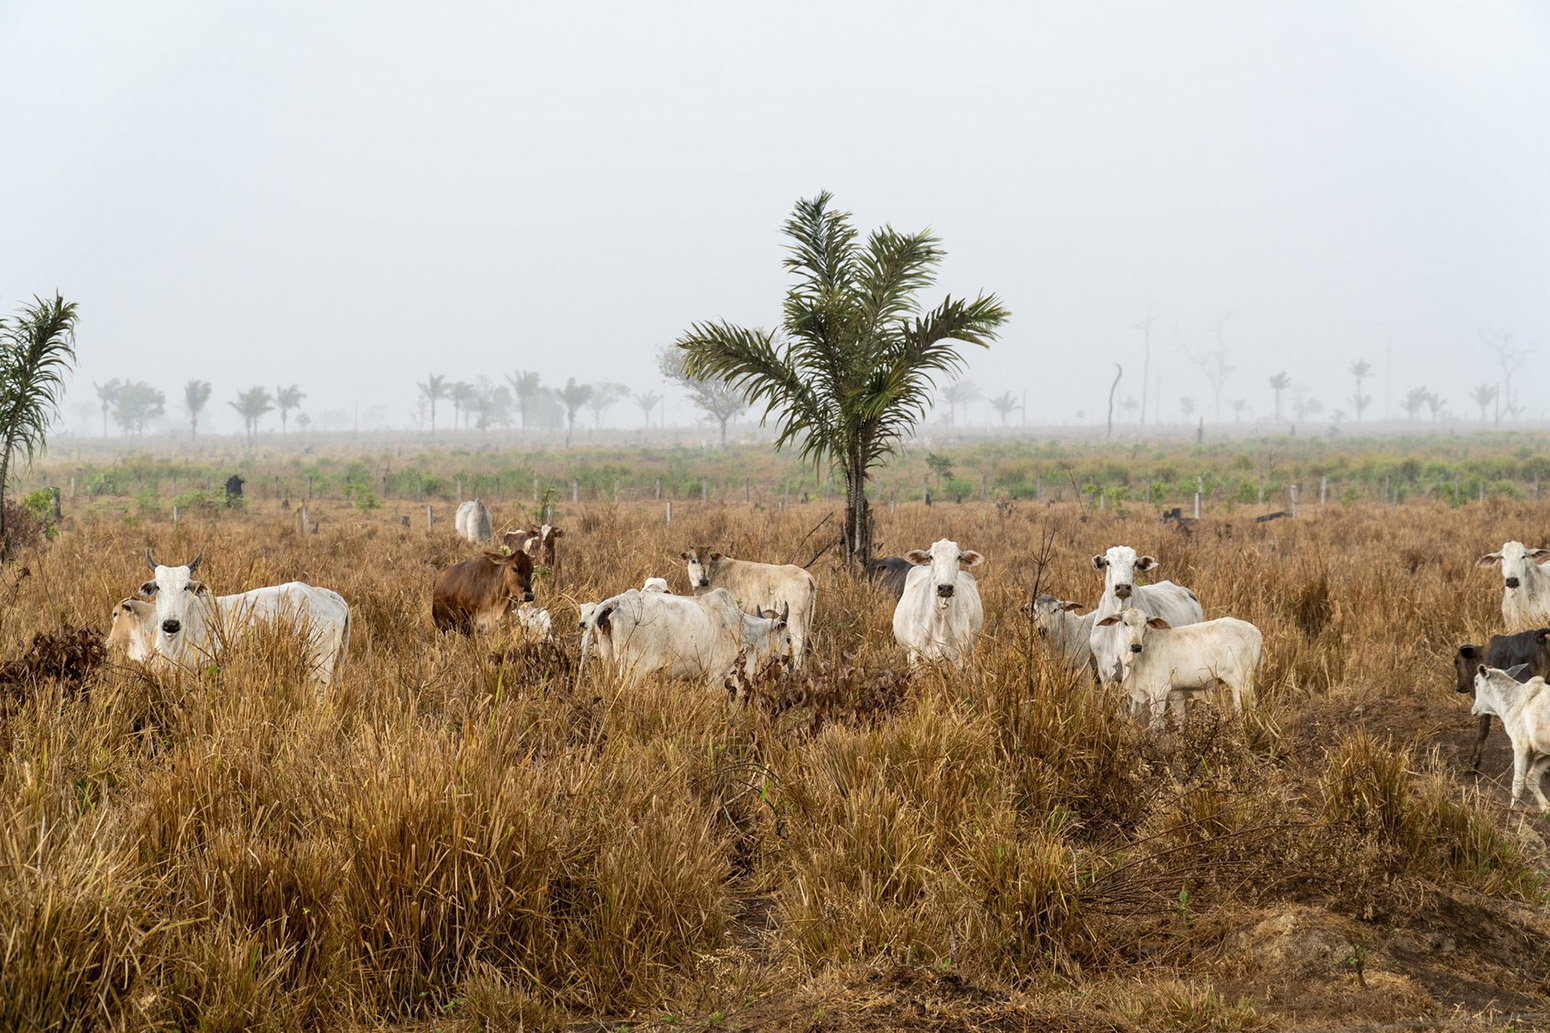 Cattle in farm pasture in the Amazon rainforest, with smoke from deforestation in the background